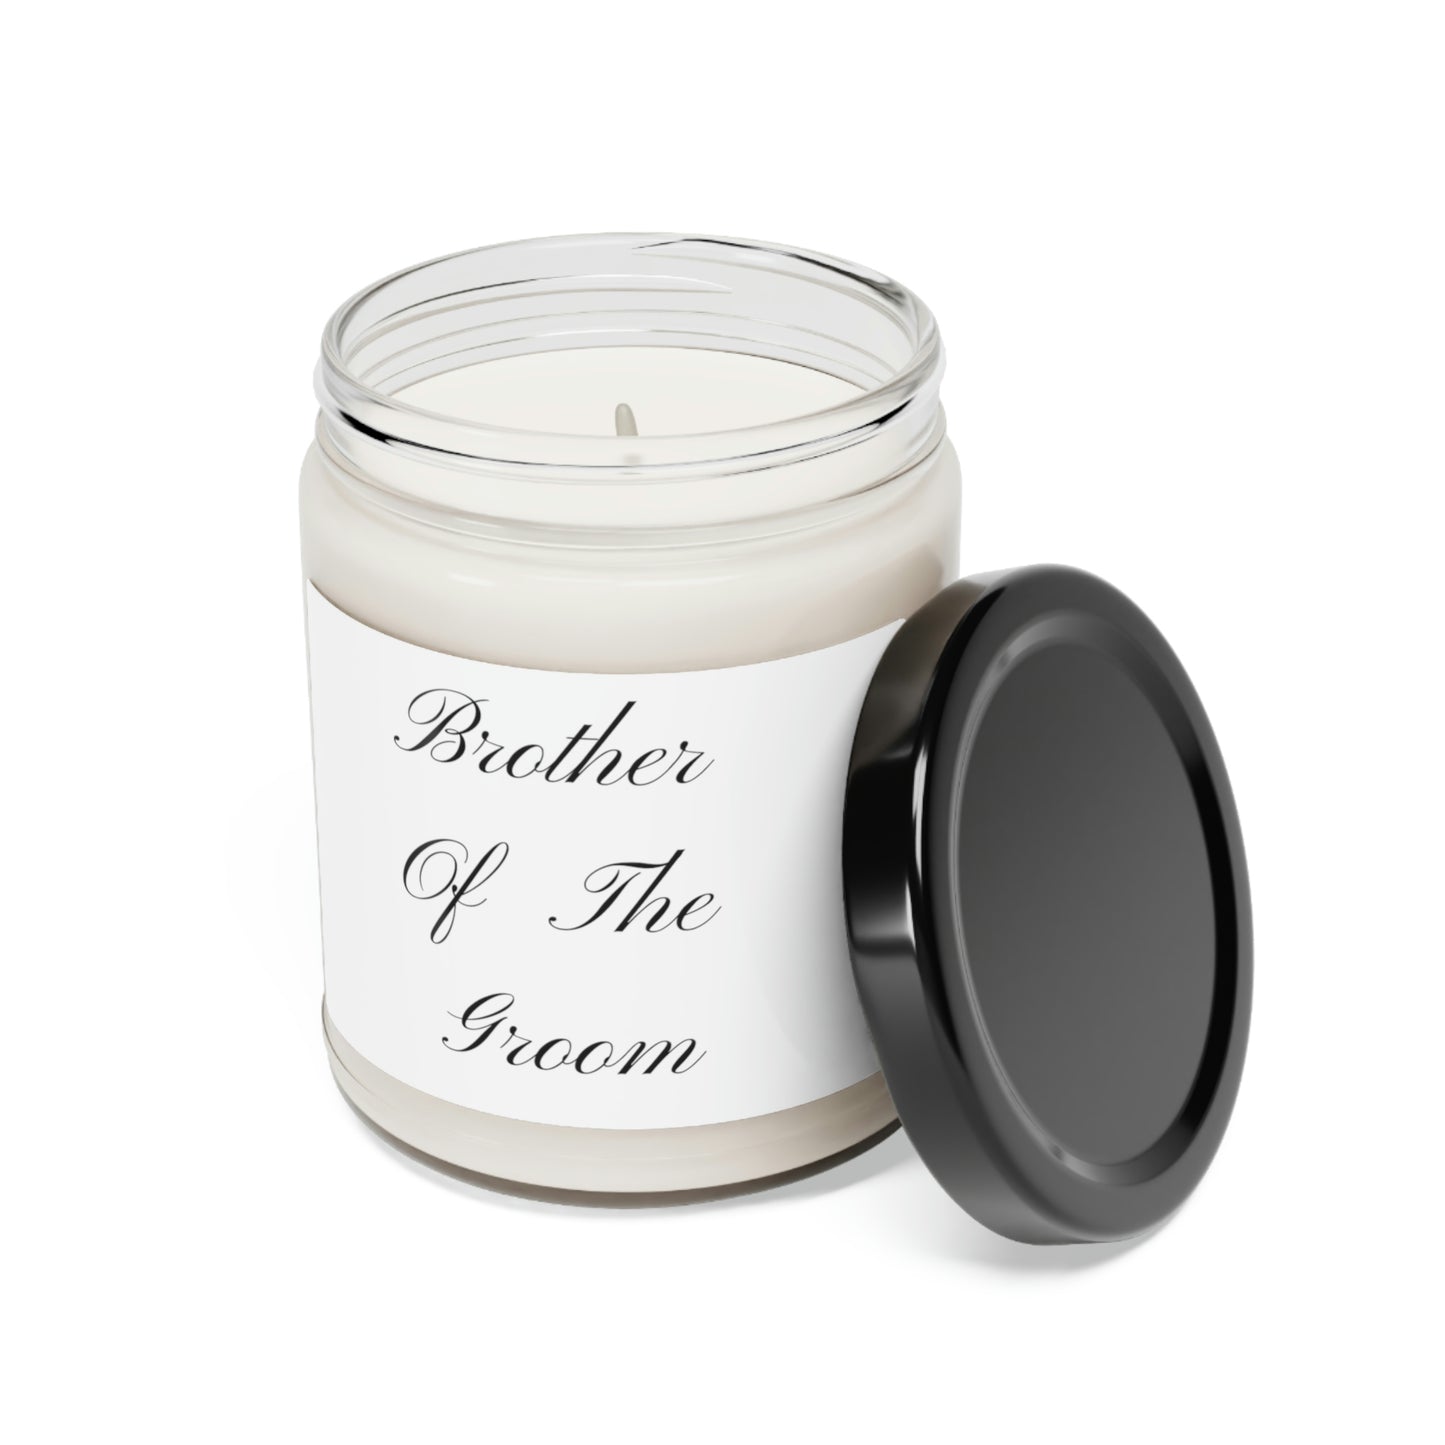 Brother Of The Groom ~Scented Soy Candle, 9oz